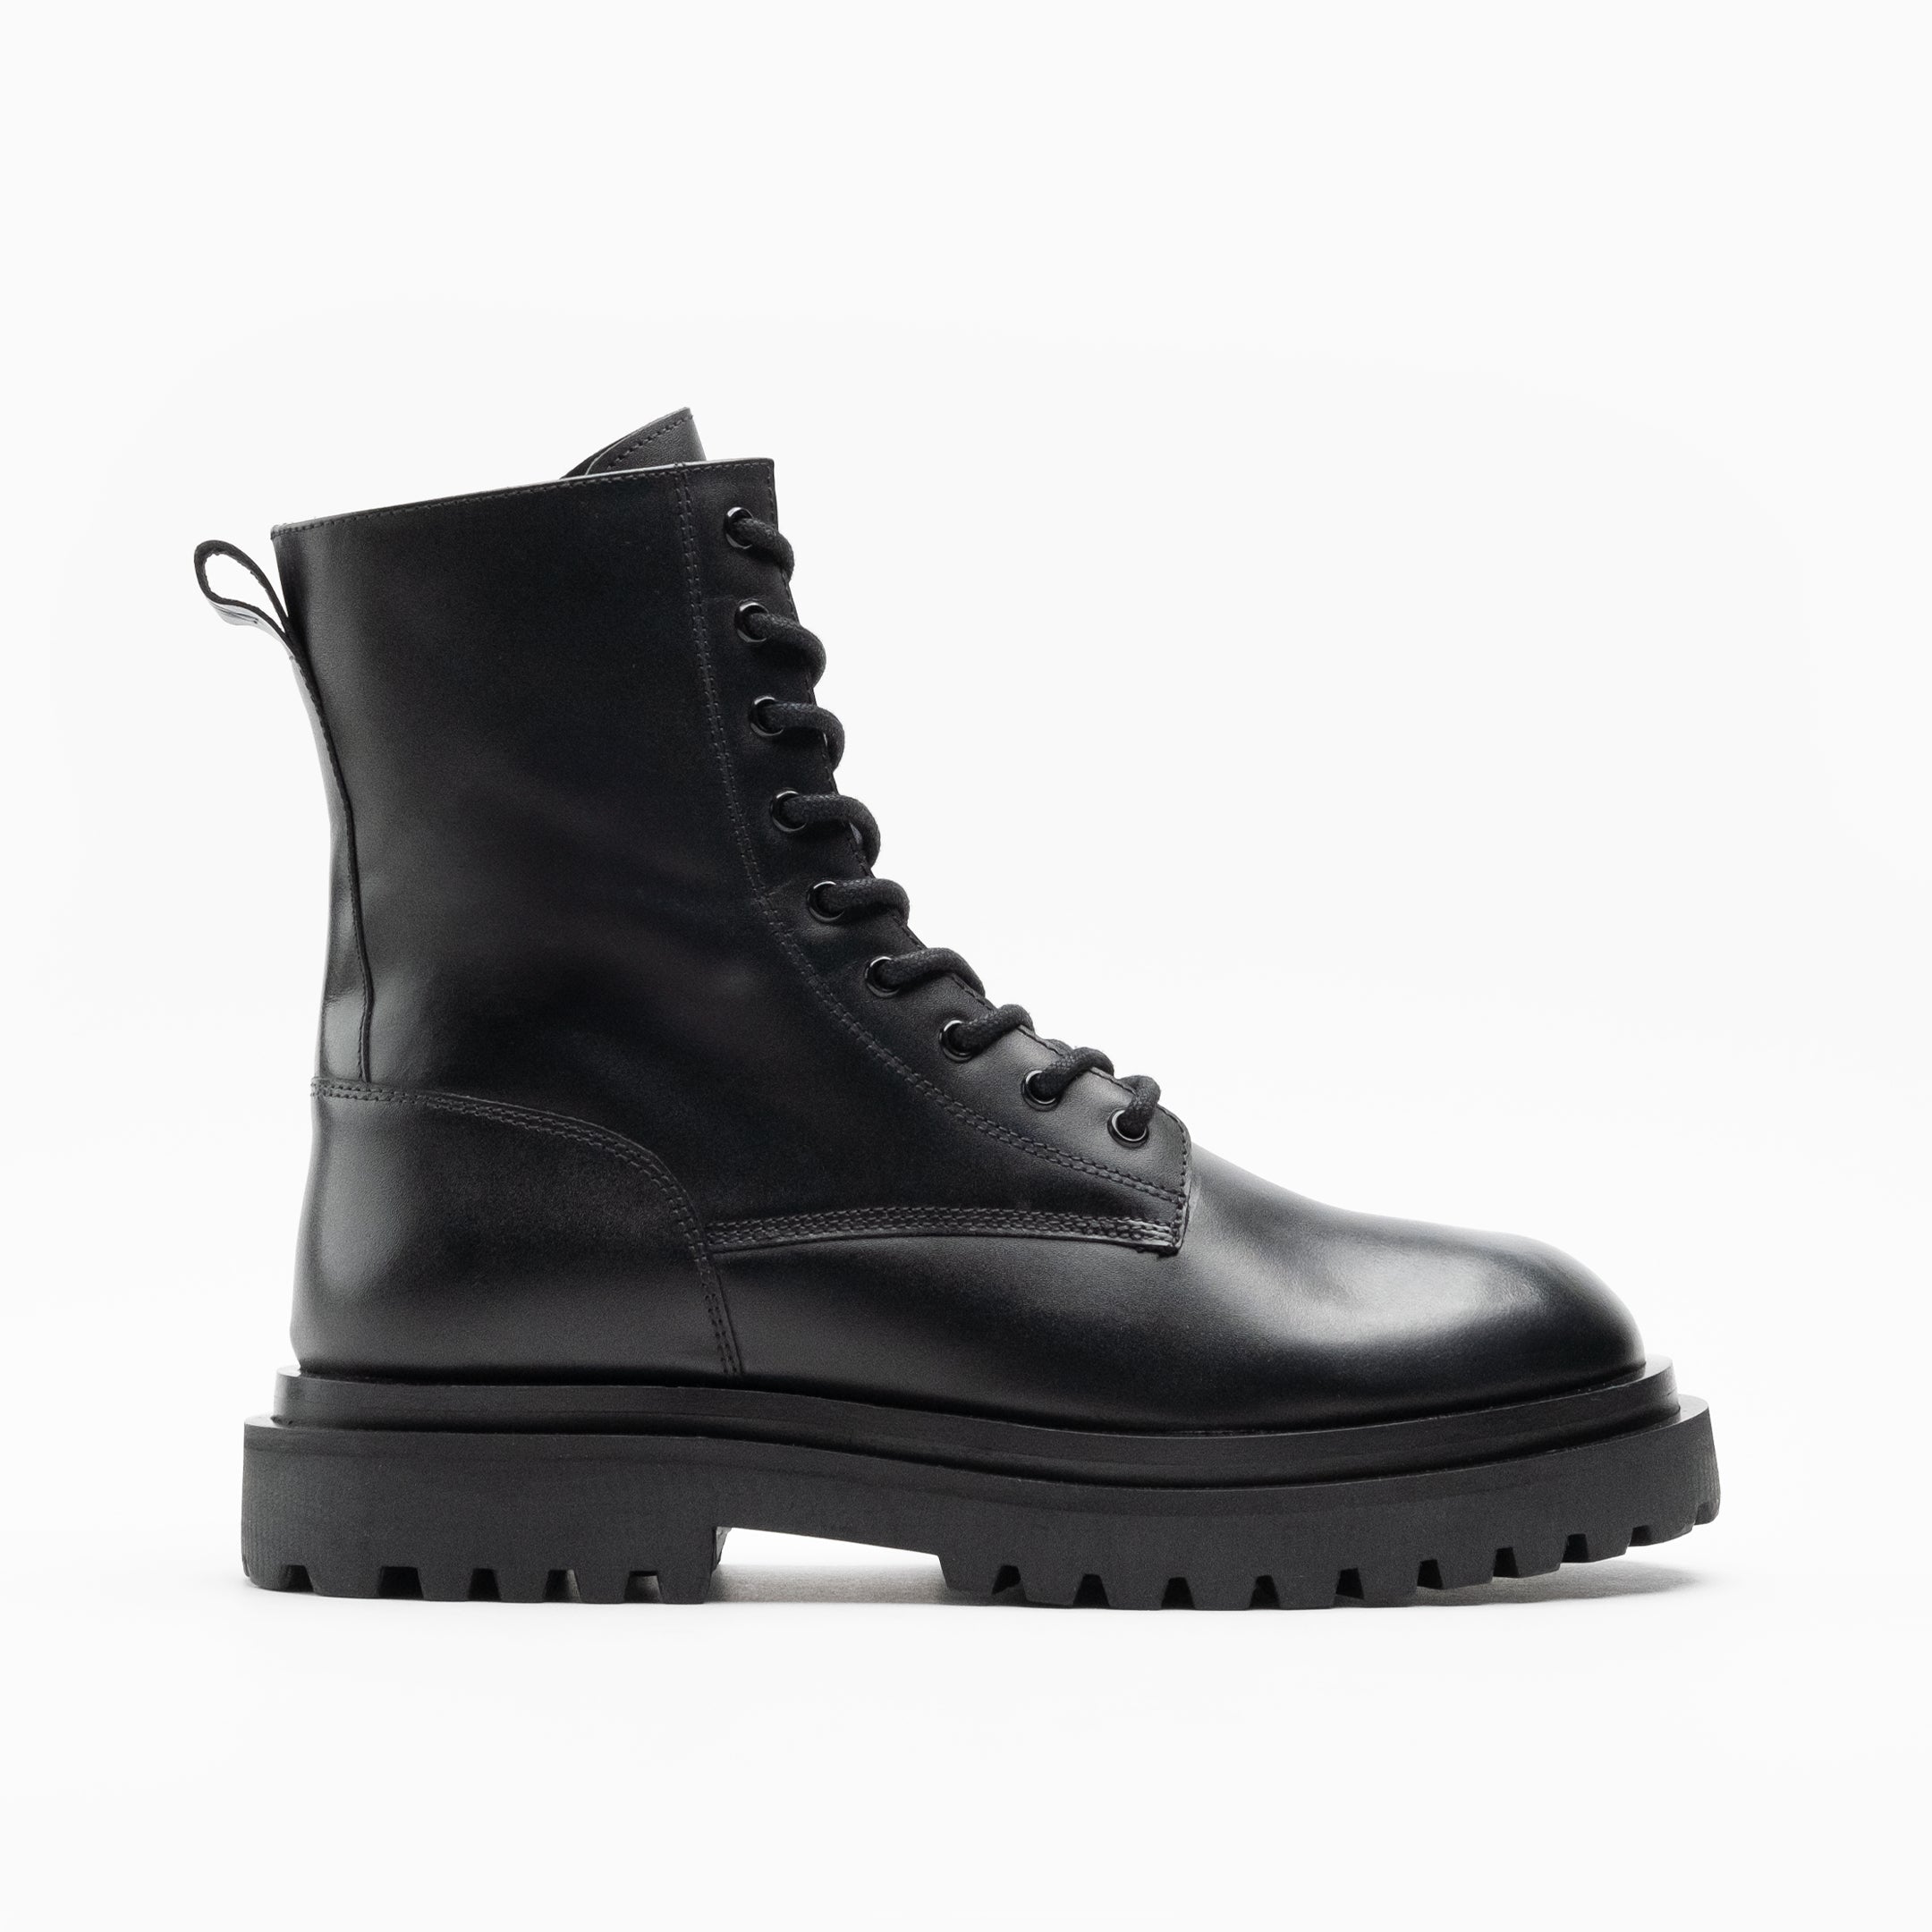 Walk London Sully Lace Boot - Black Leather - Official Site